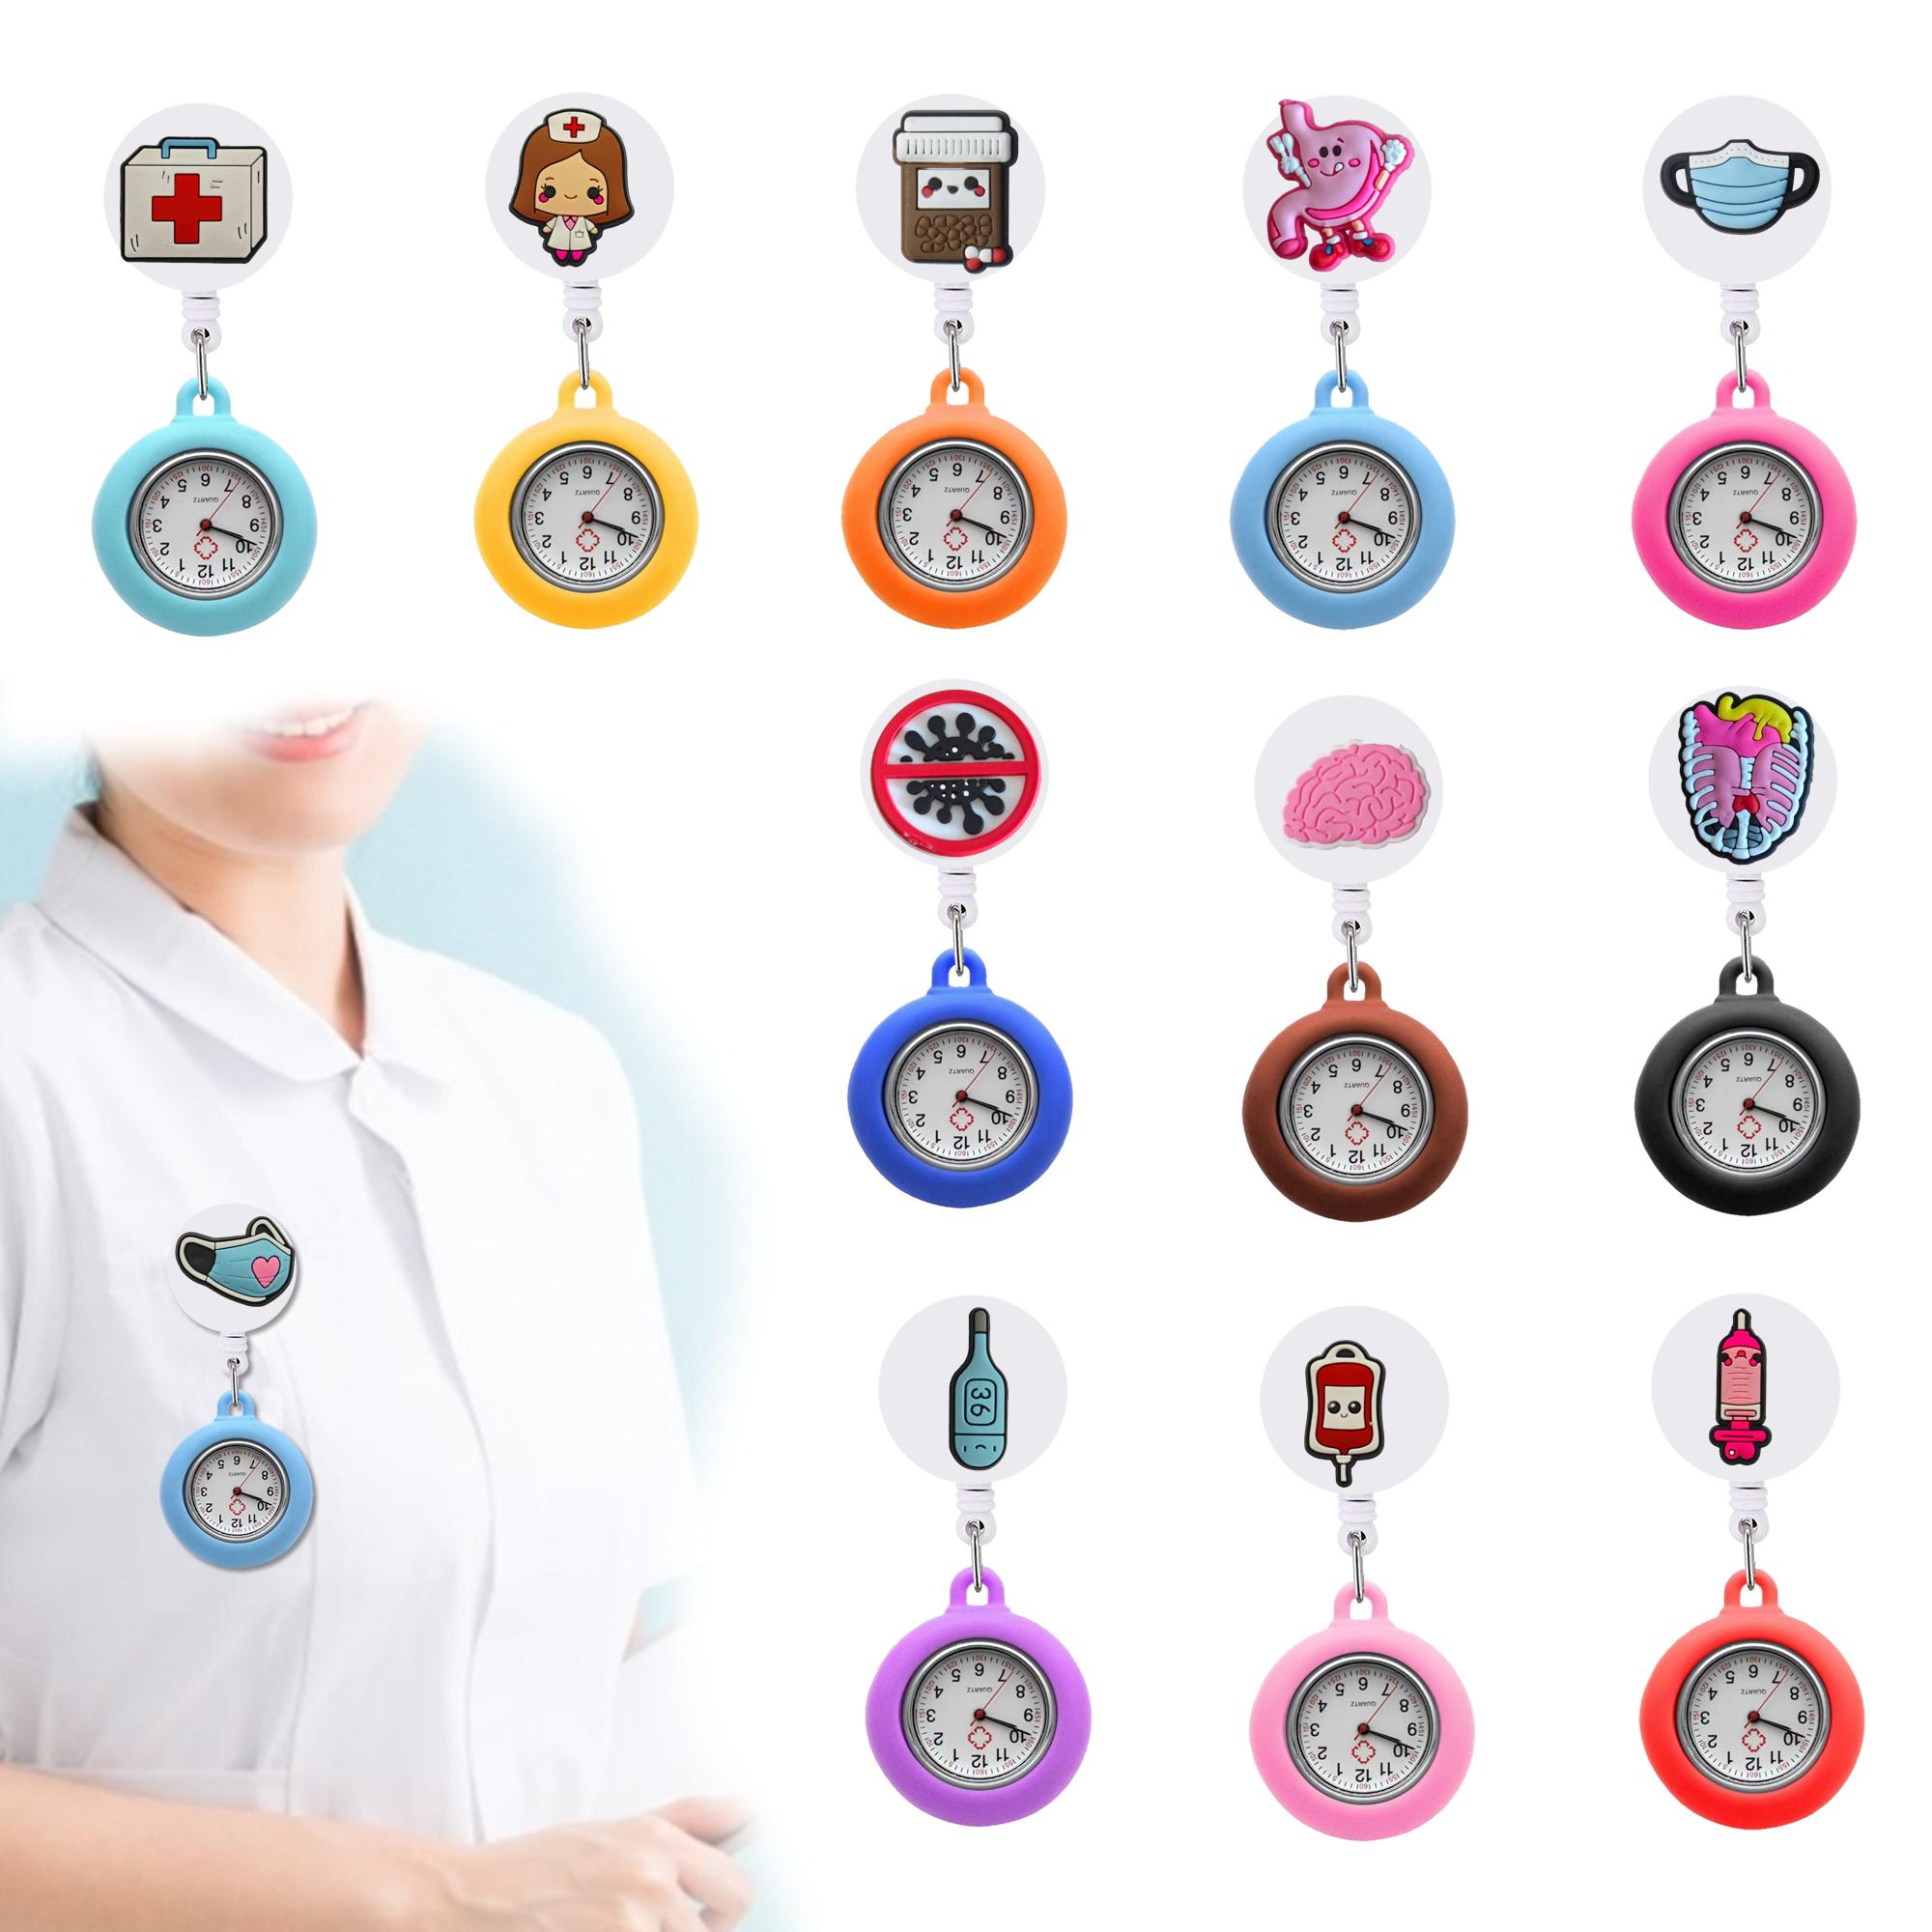 Other Medical 1 Clip Pocket Watches Fob Hang Medicine Clock Clip-On Hanging Lapel Nurse Watch Quartz Brooch Watche For With Sile Case Otykg